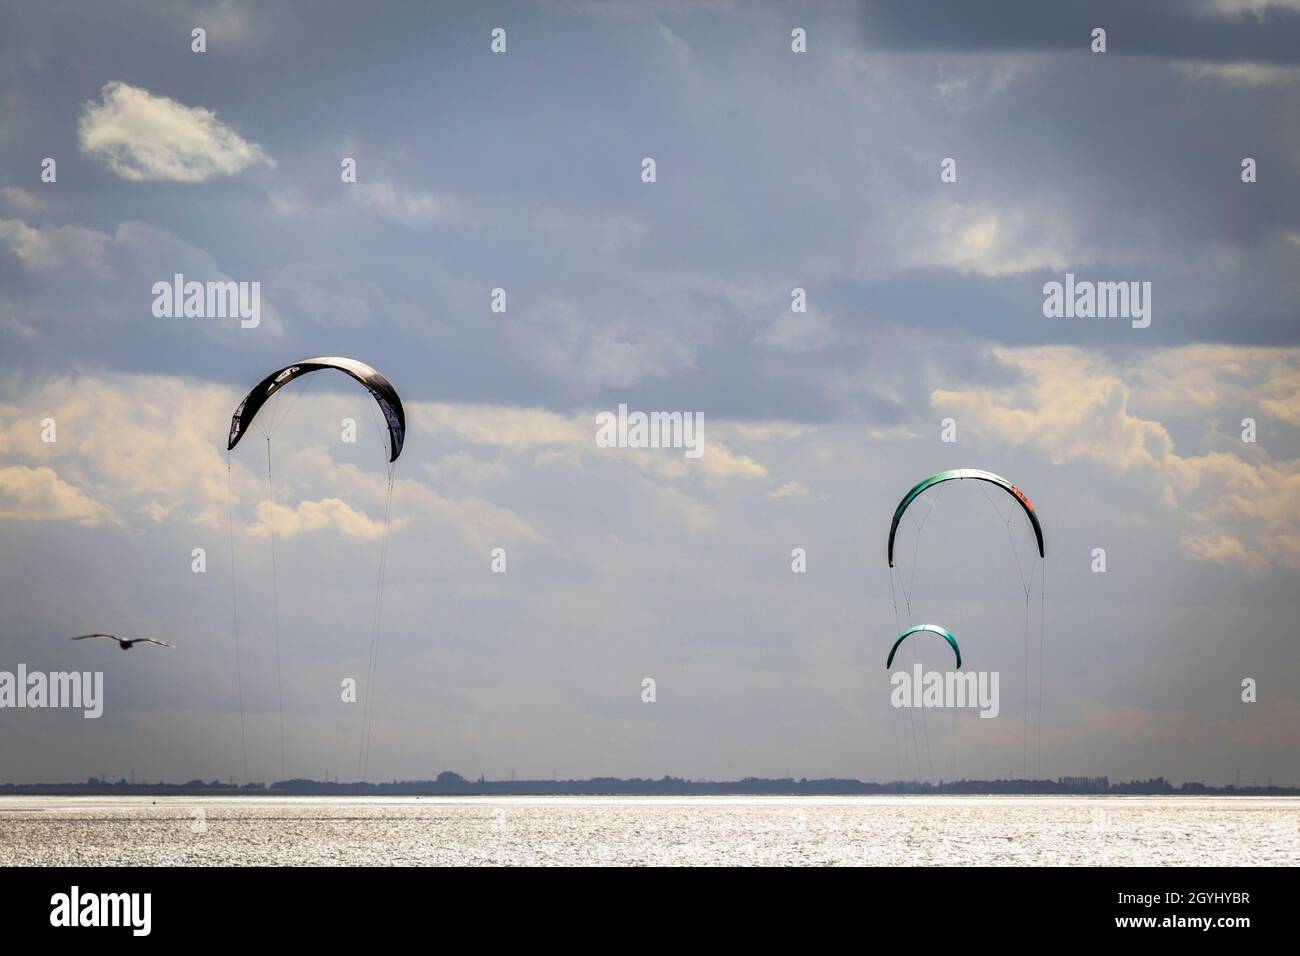 Windsurfing at Hunstanton on a Windy October Afternoon Stock Photo